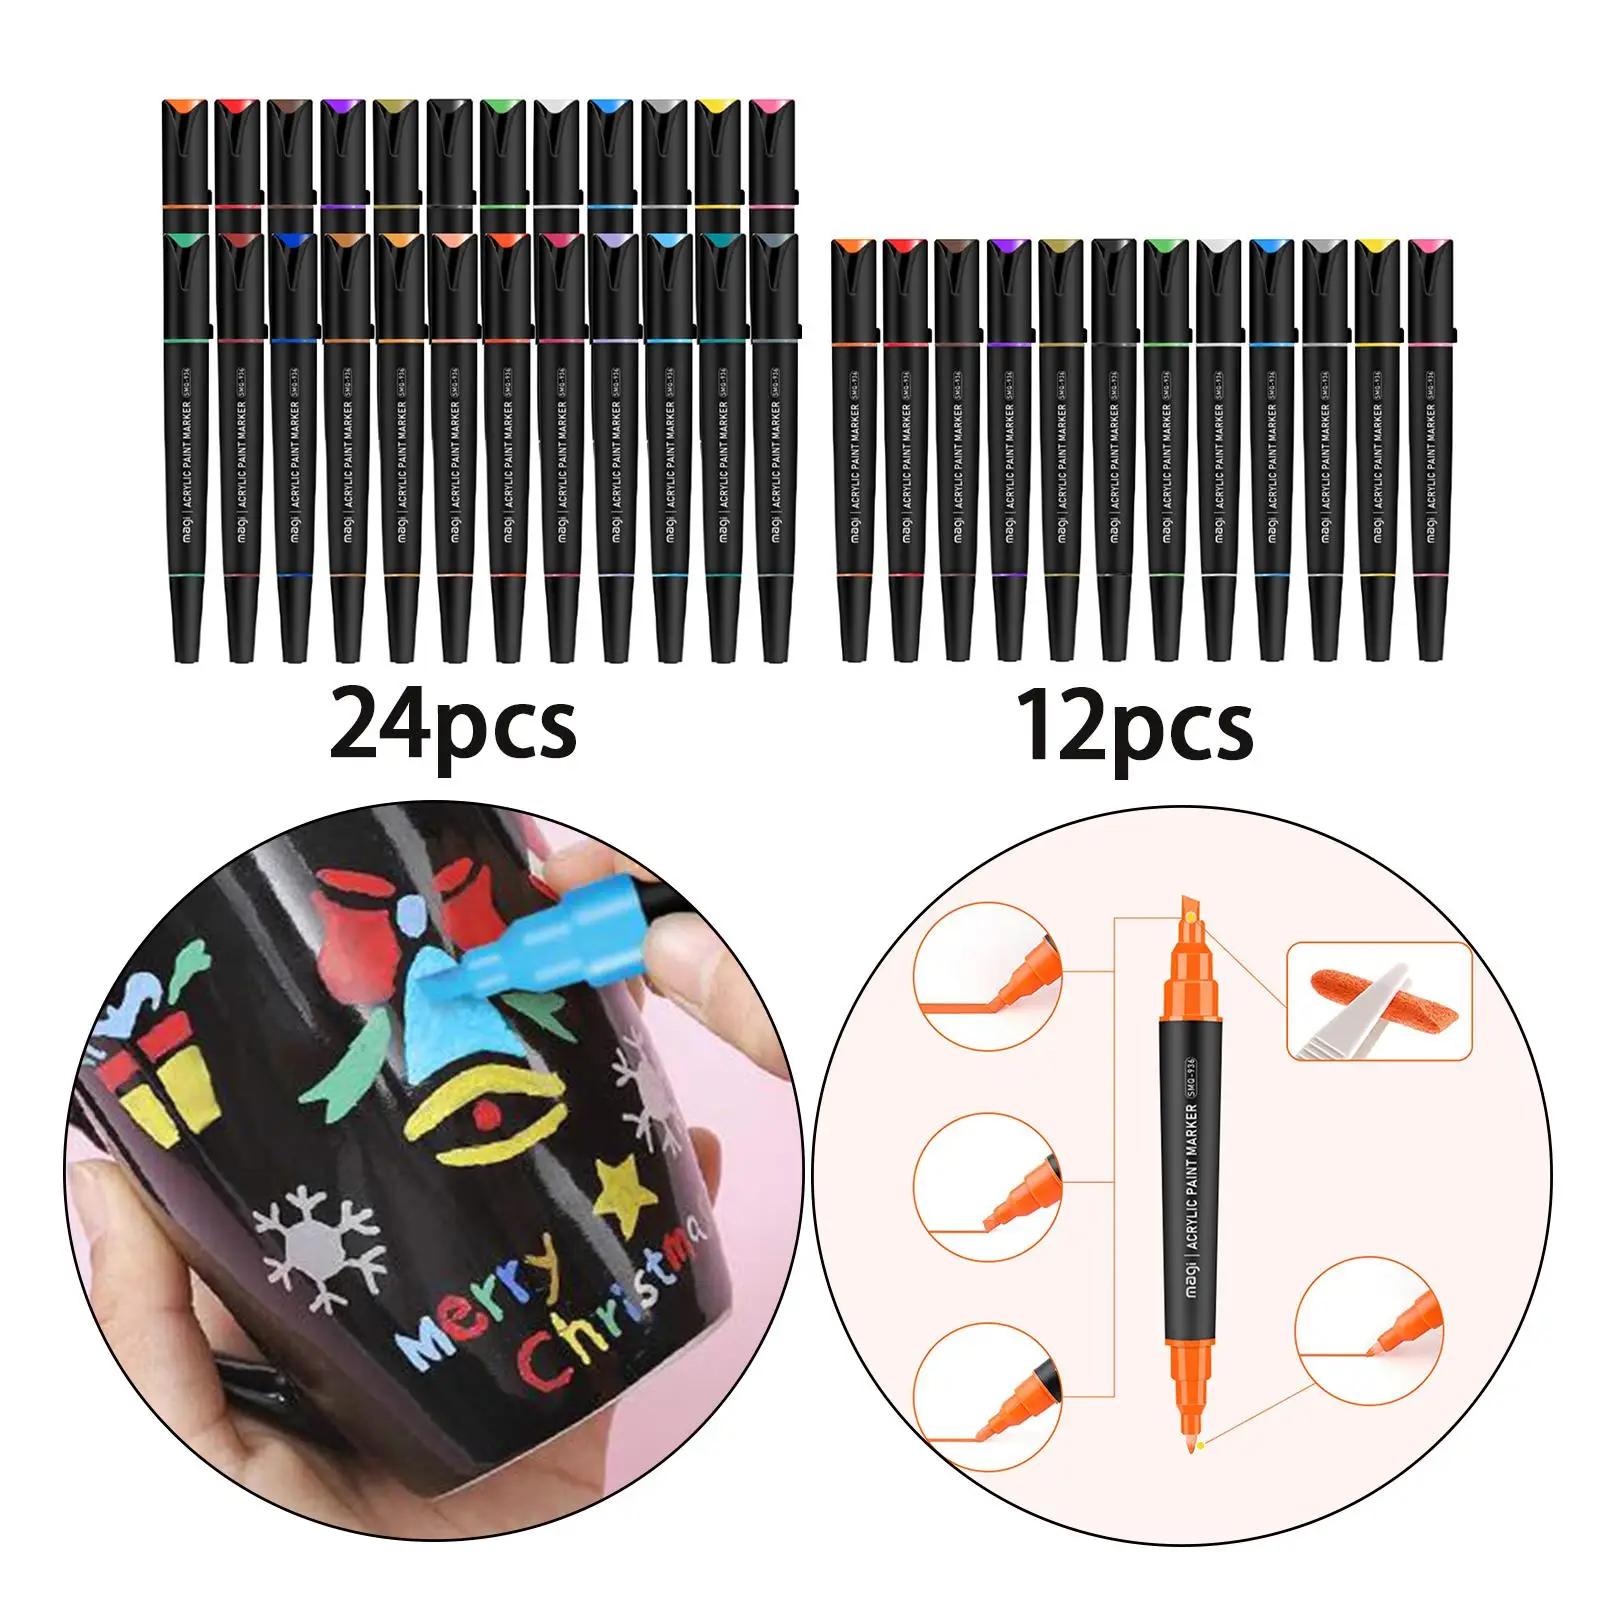 DIY Acrylic Paint Marker Pen Kit, Permanent Double Ended Waterproof Marker Drying Plastic Art Crafts